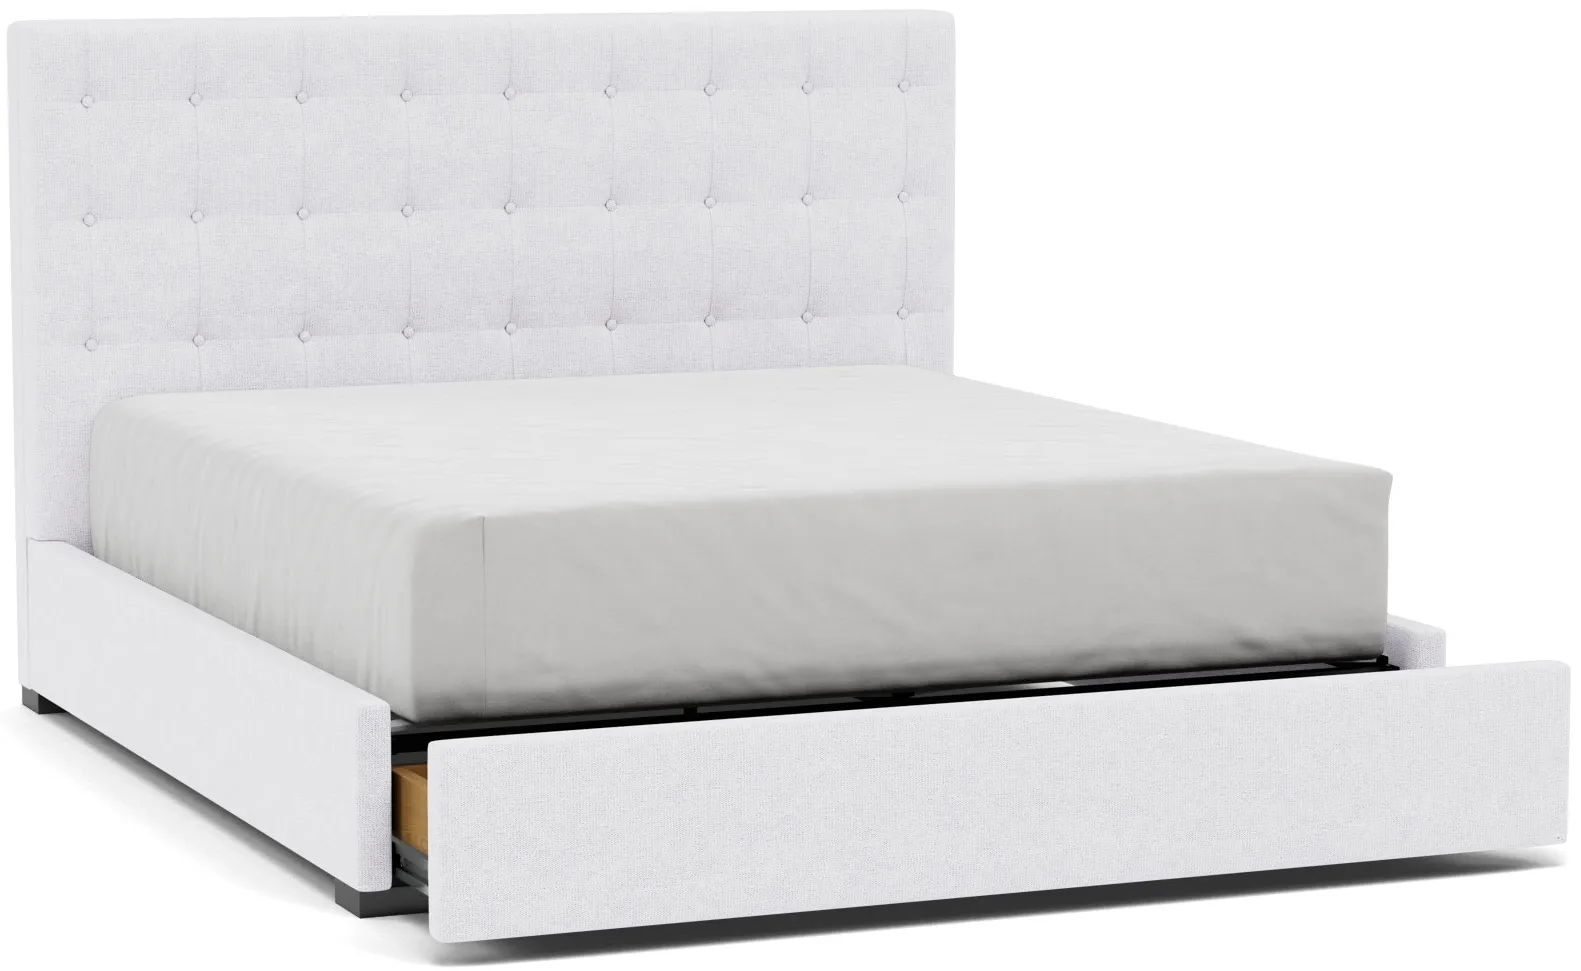 Abby King Upholstered Storage Bed in Tech Arctic